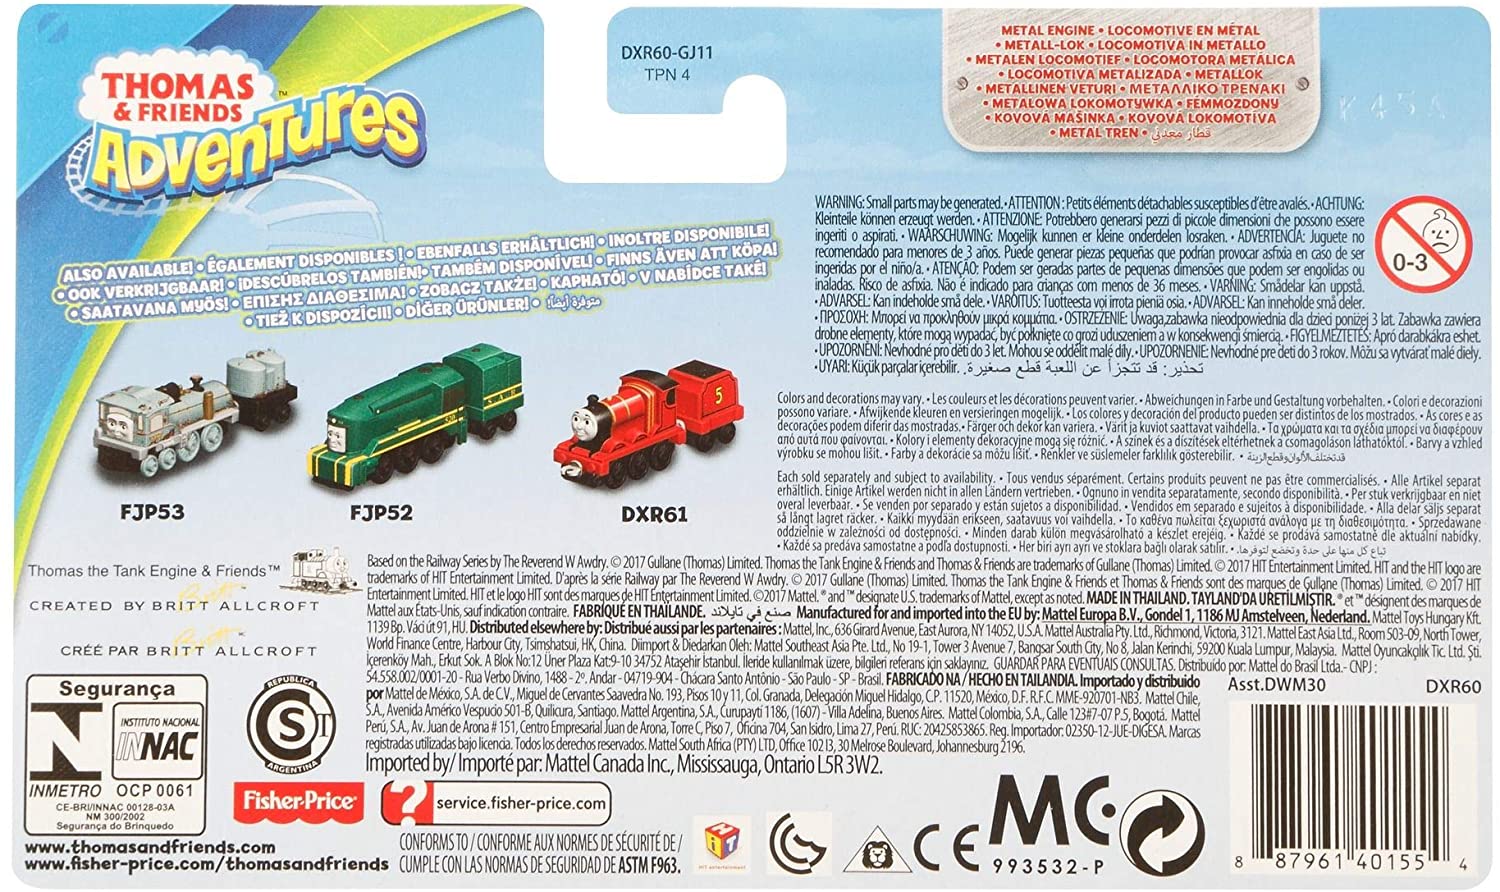 FISHER PRICE METAL THOMAS AND FRIENDS neuf sur carte Hurricane moteur Steelworks 